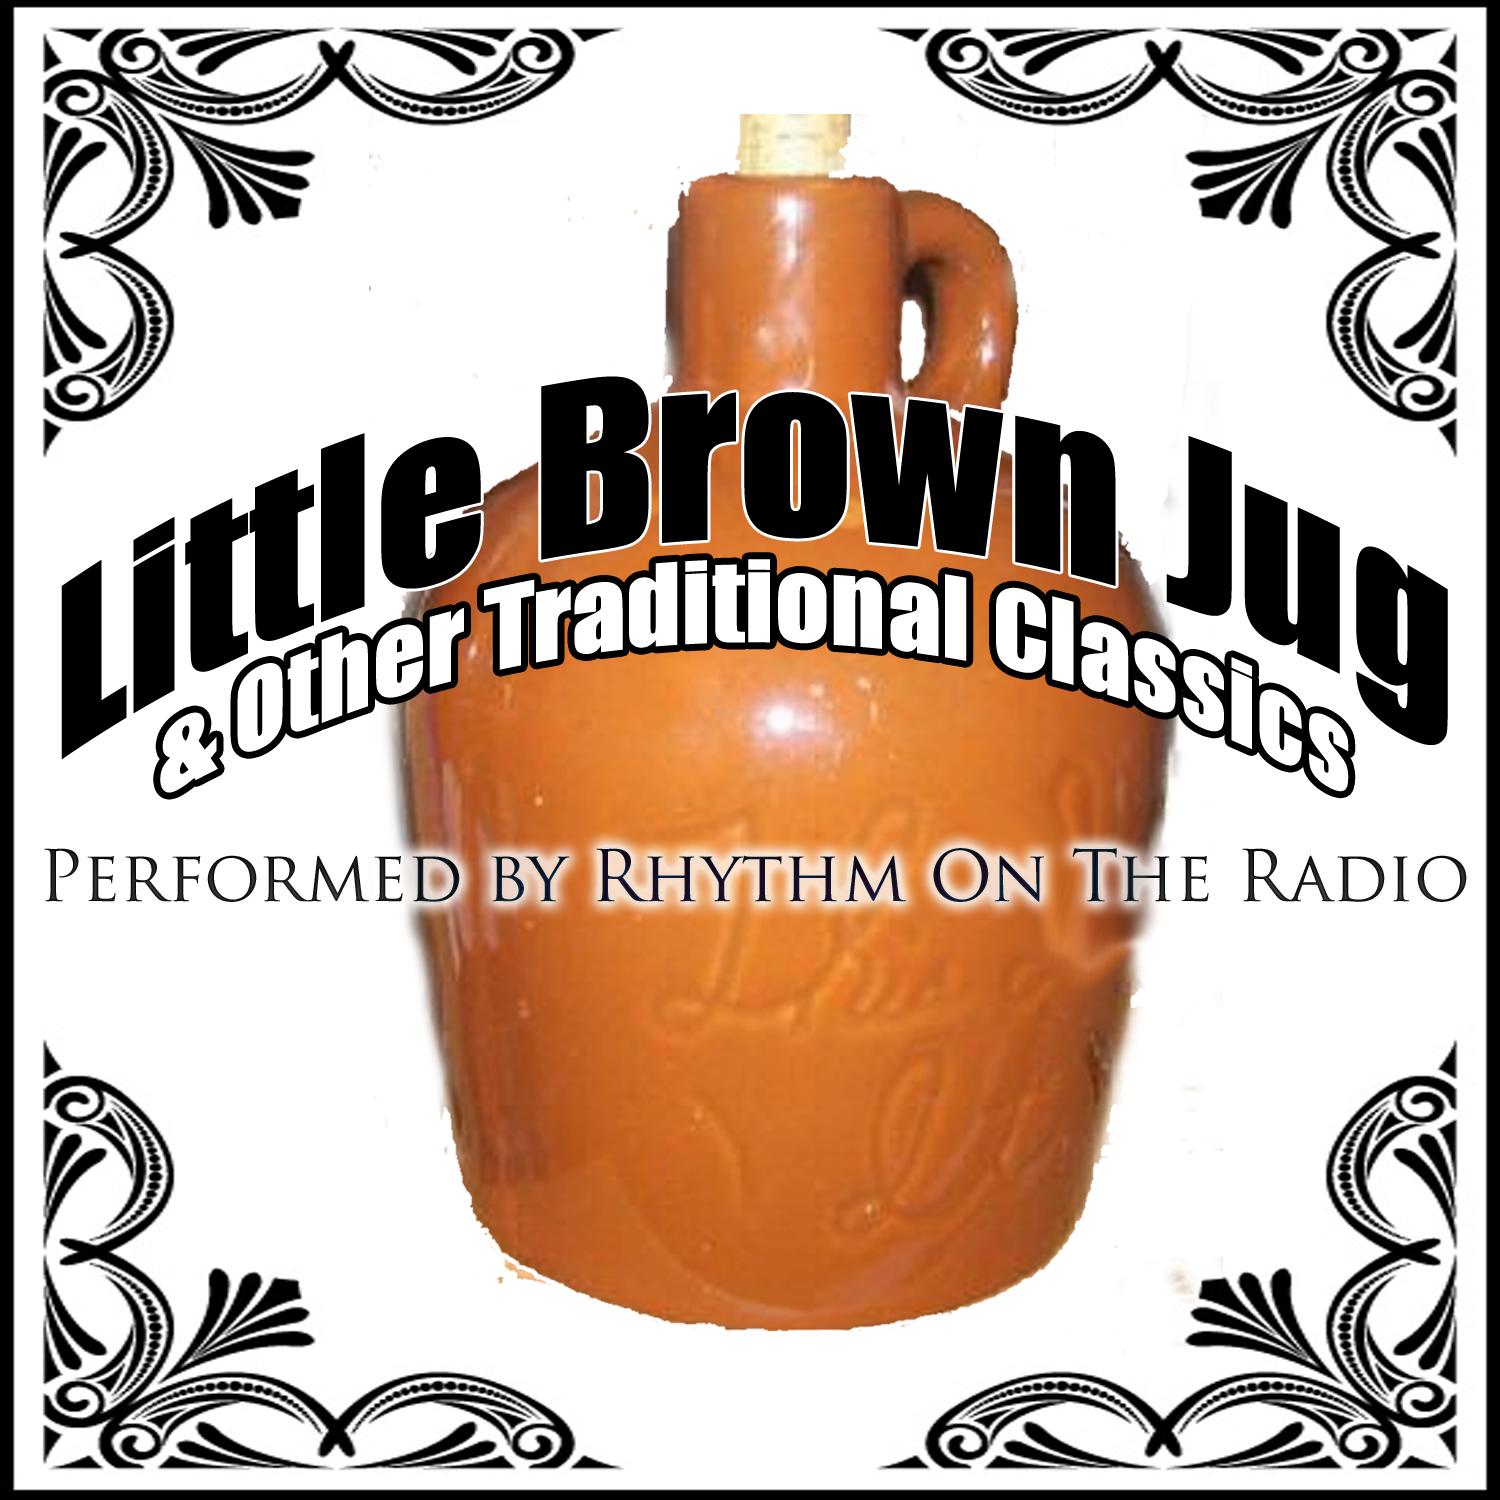 Little Brown Jug & Other Traditional Classics